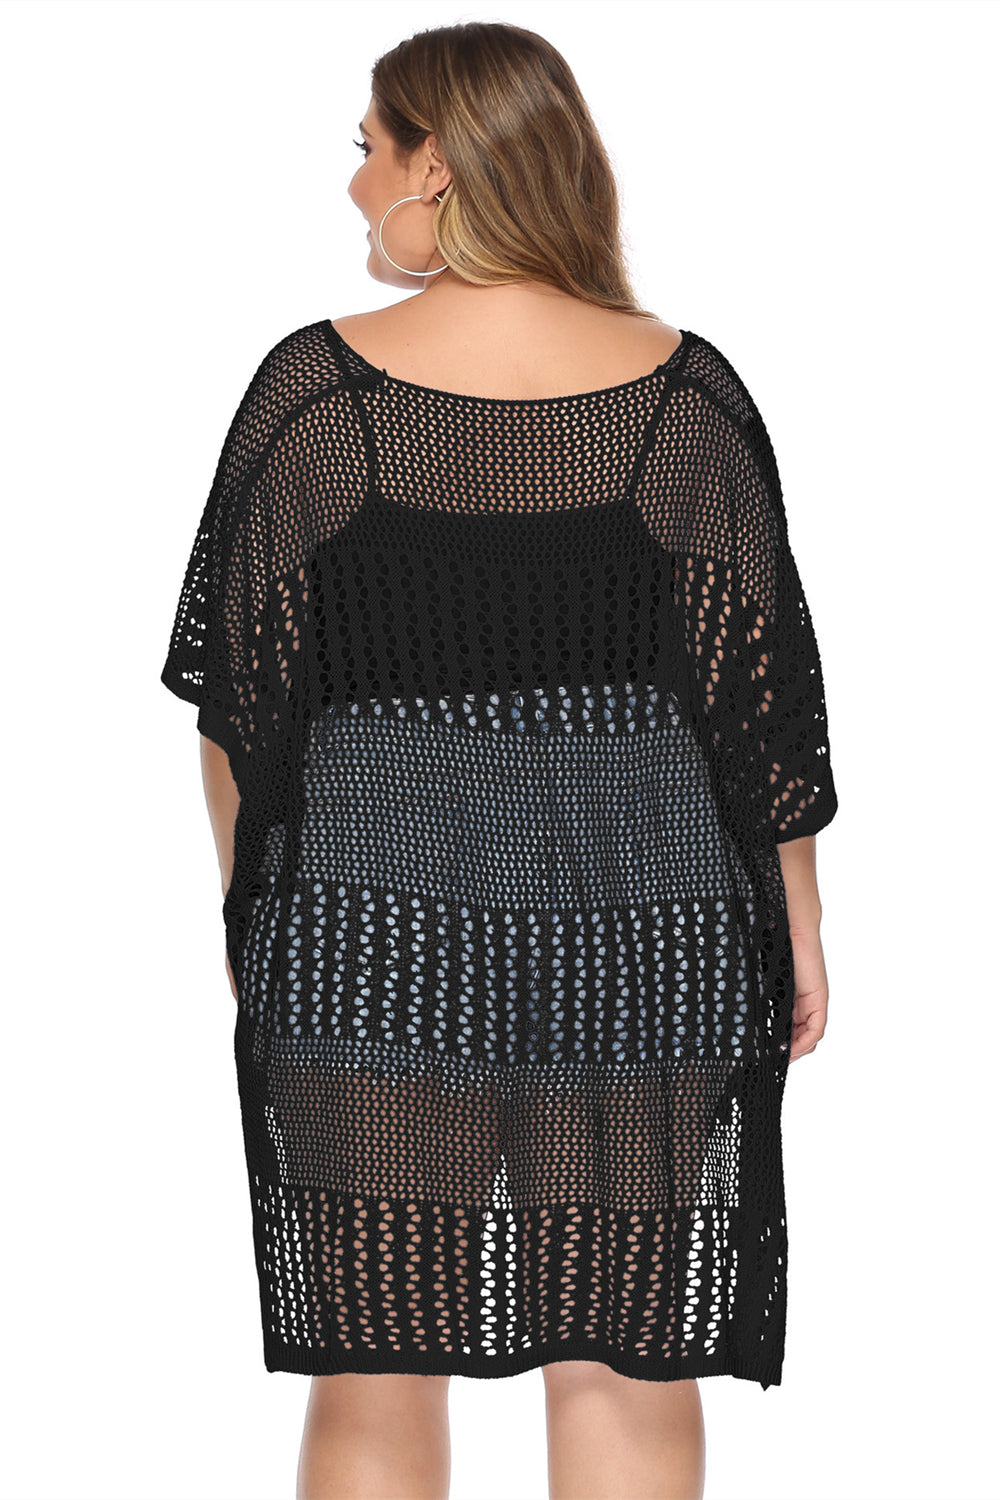 Sexy Plus Size Hollow Out Crochet Cover Ups